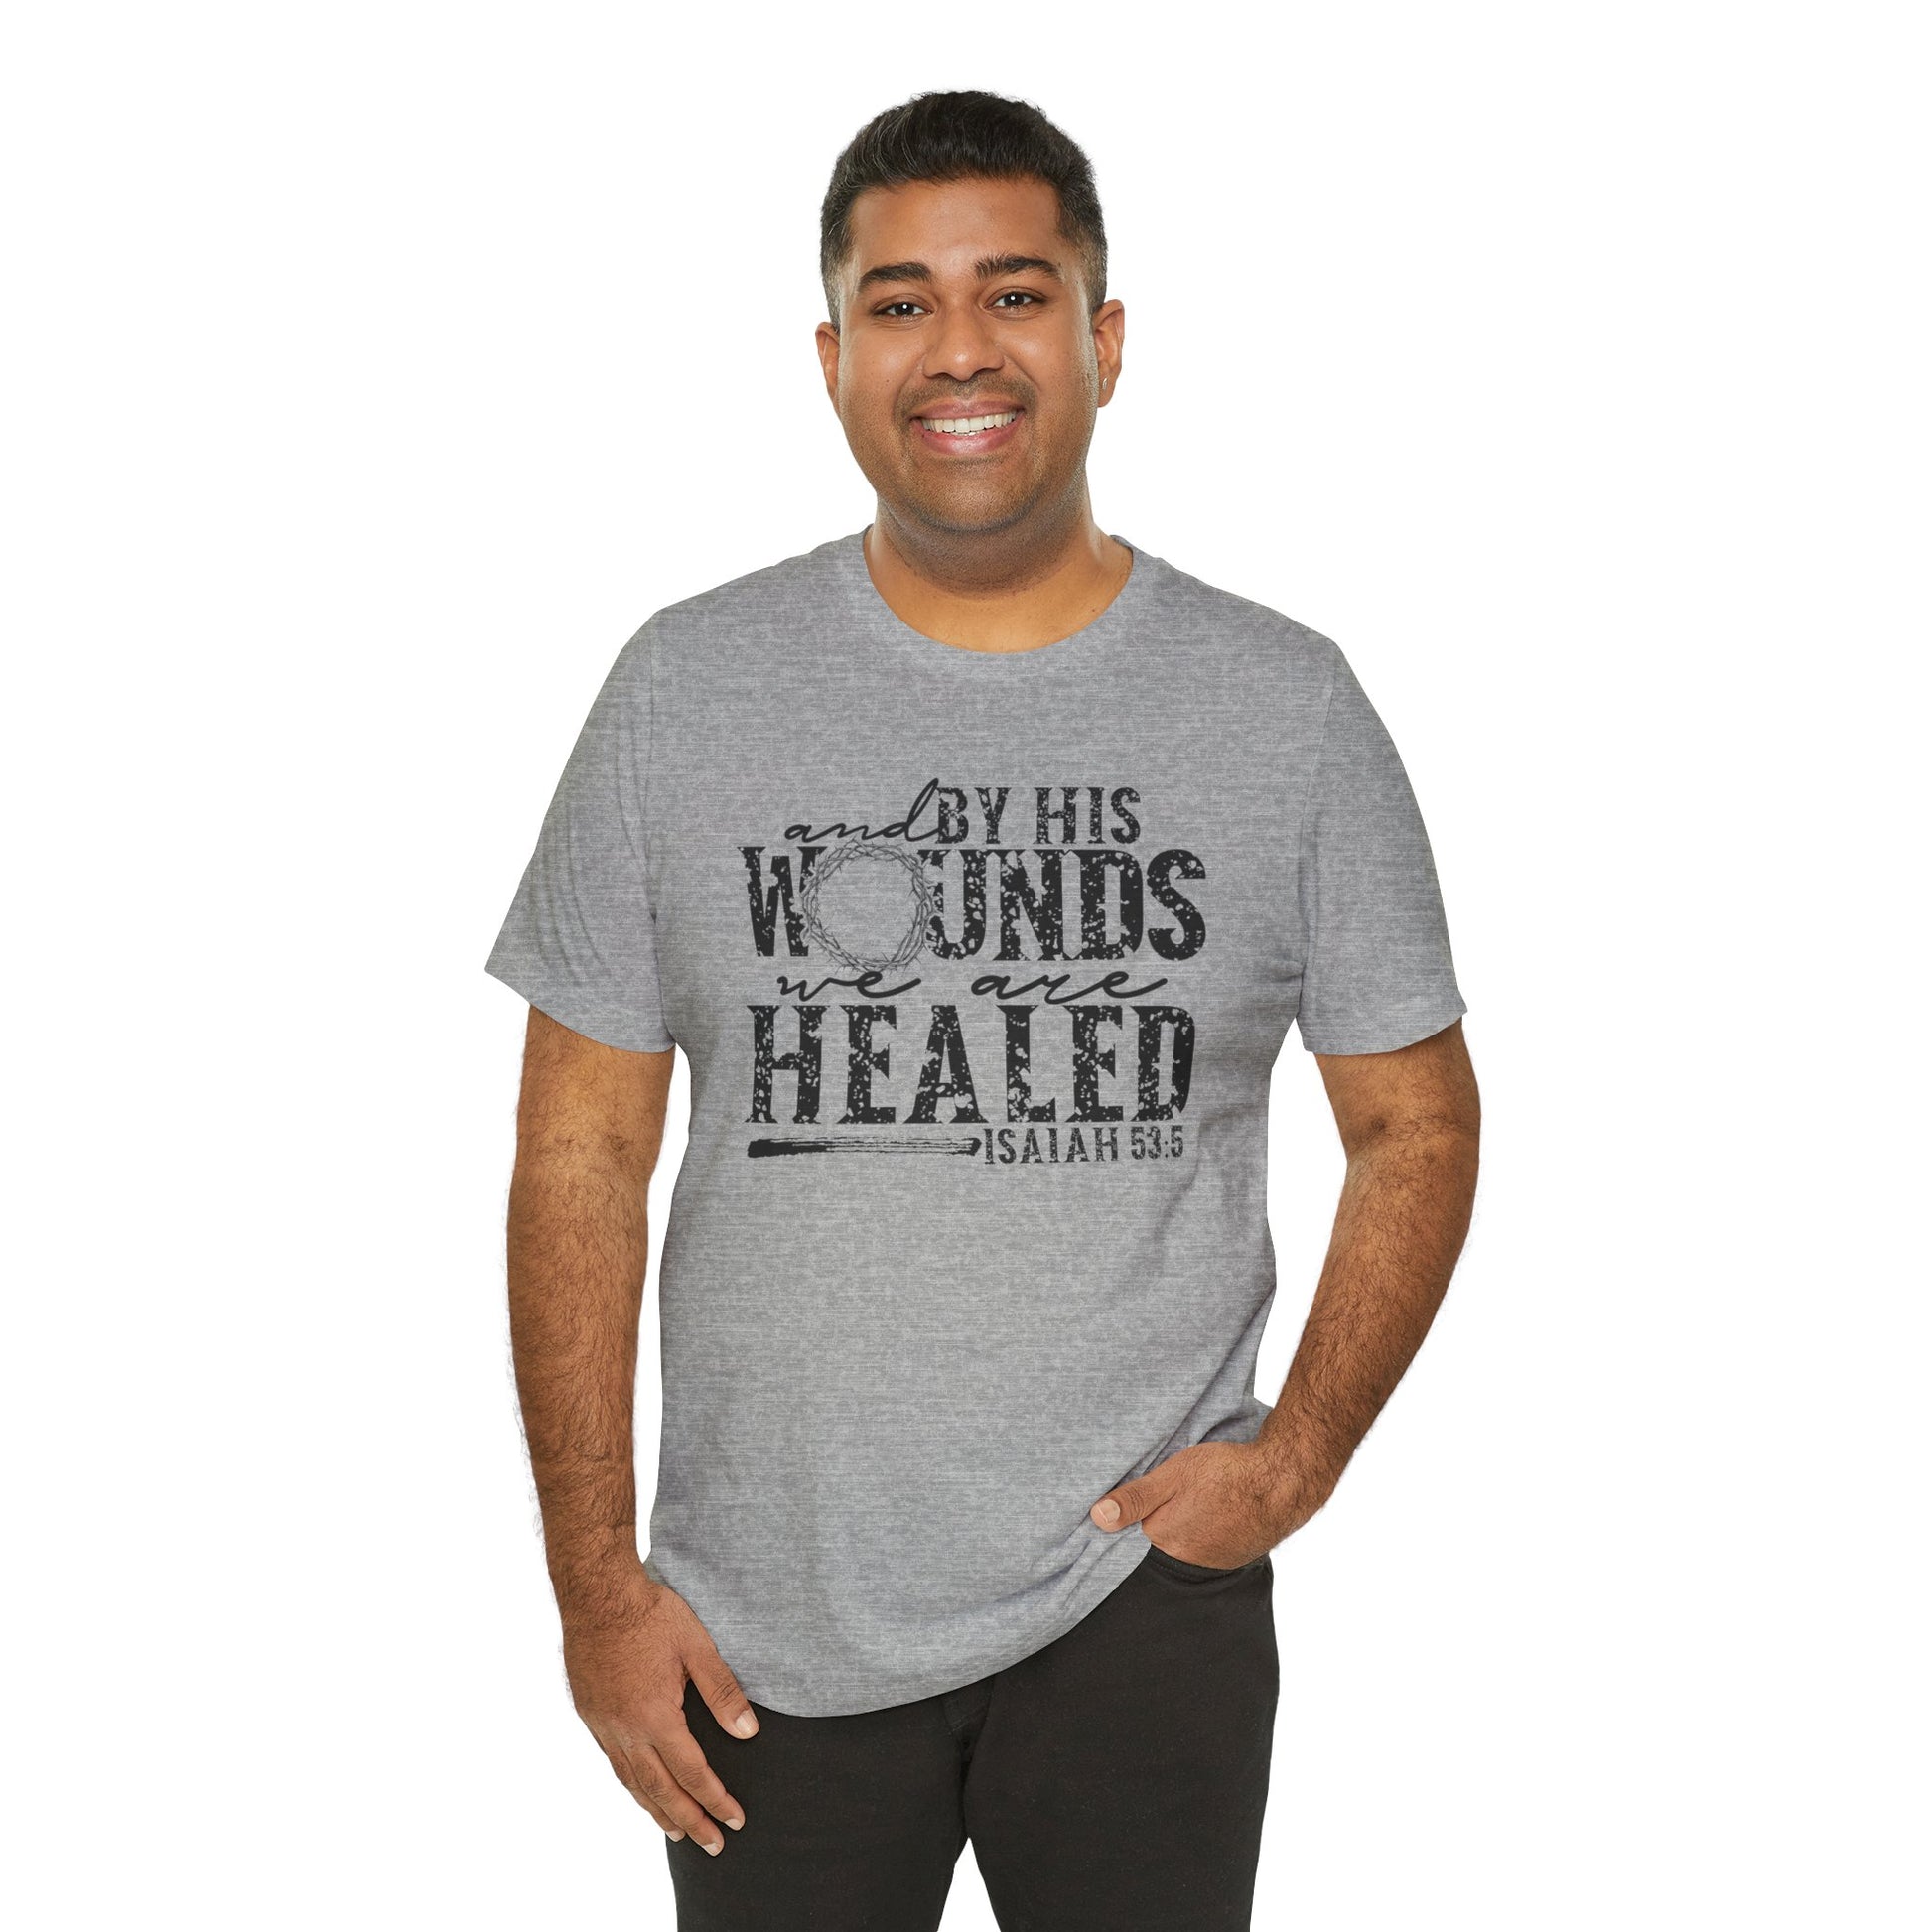 By His Wounds We Are Healed Shirt